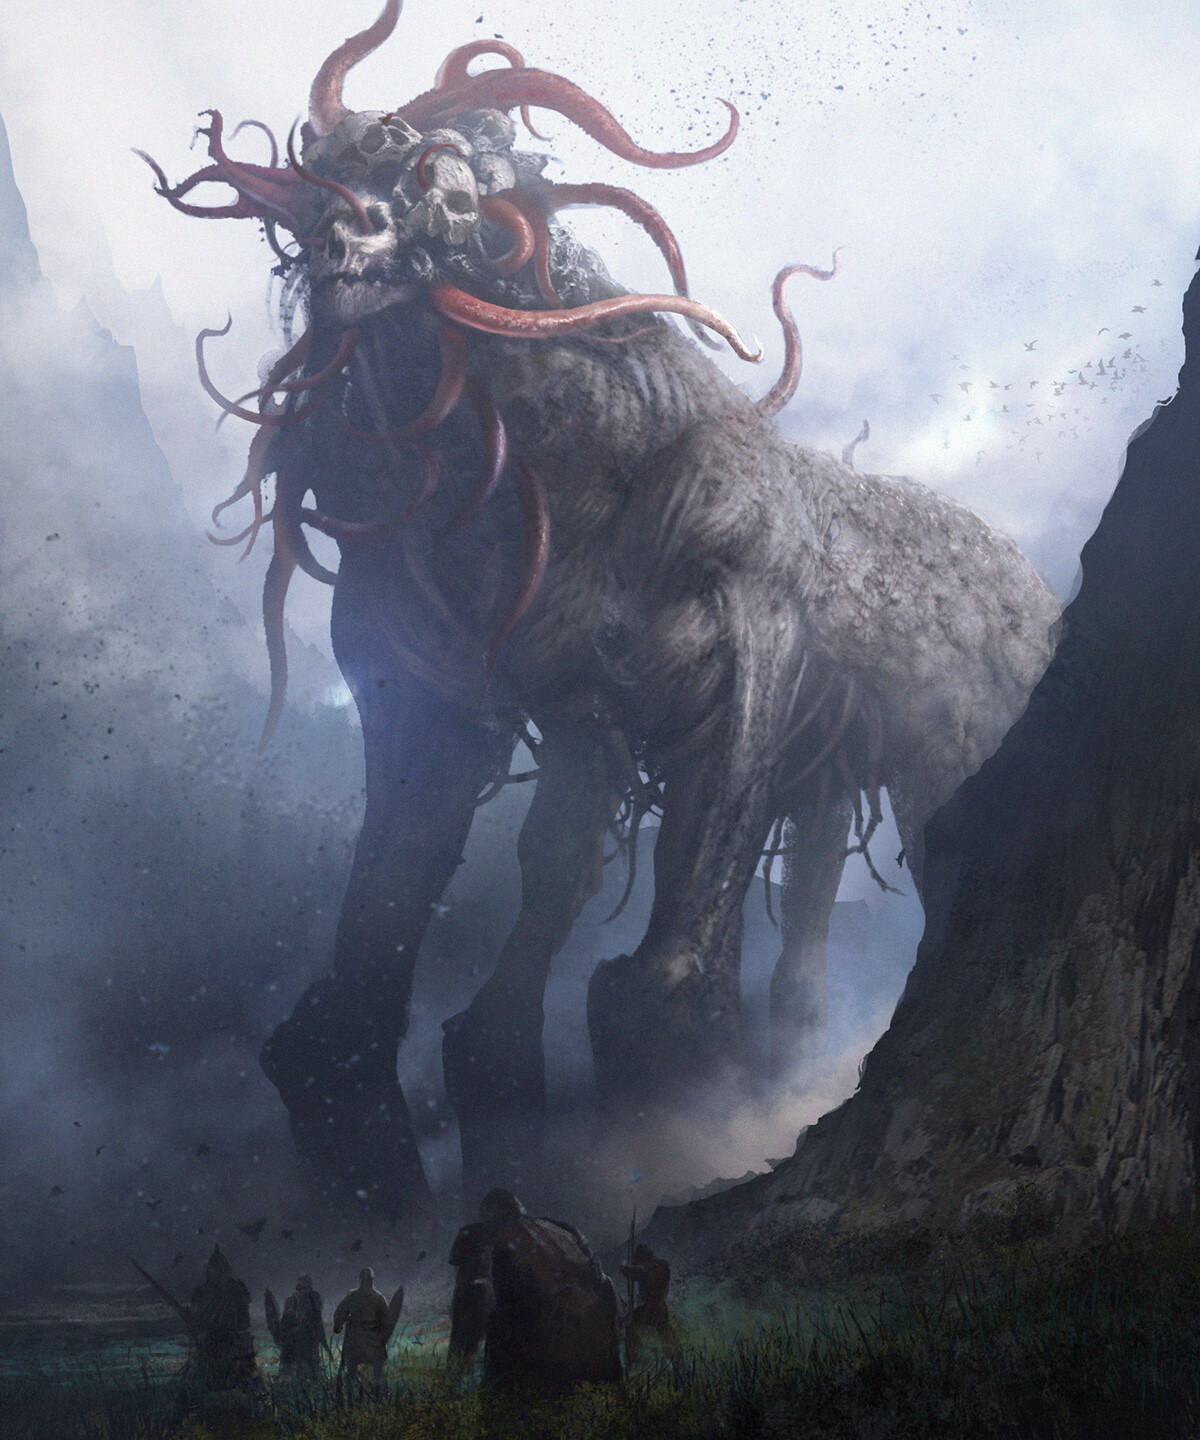 Mist by Dong Geon Son. .. &quot;calm down you clowns, its a scavanger that feeds on giant's bones&quot;